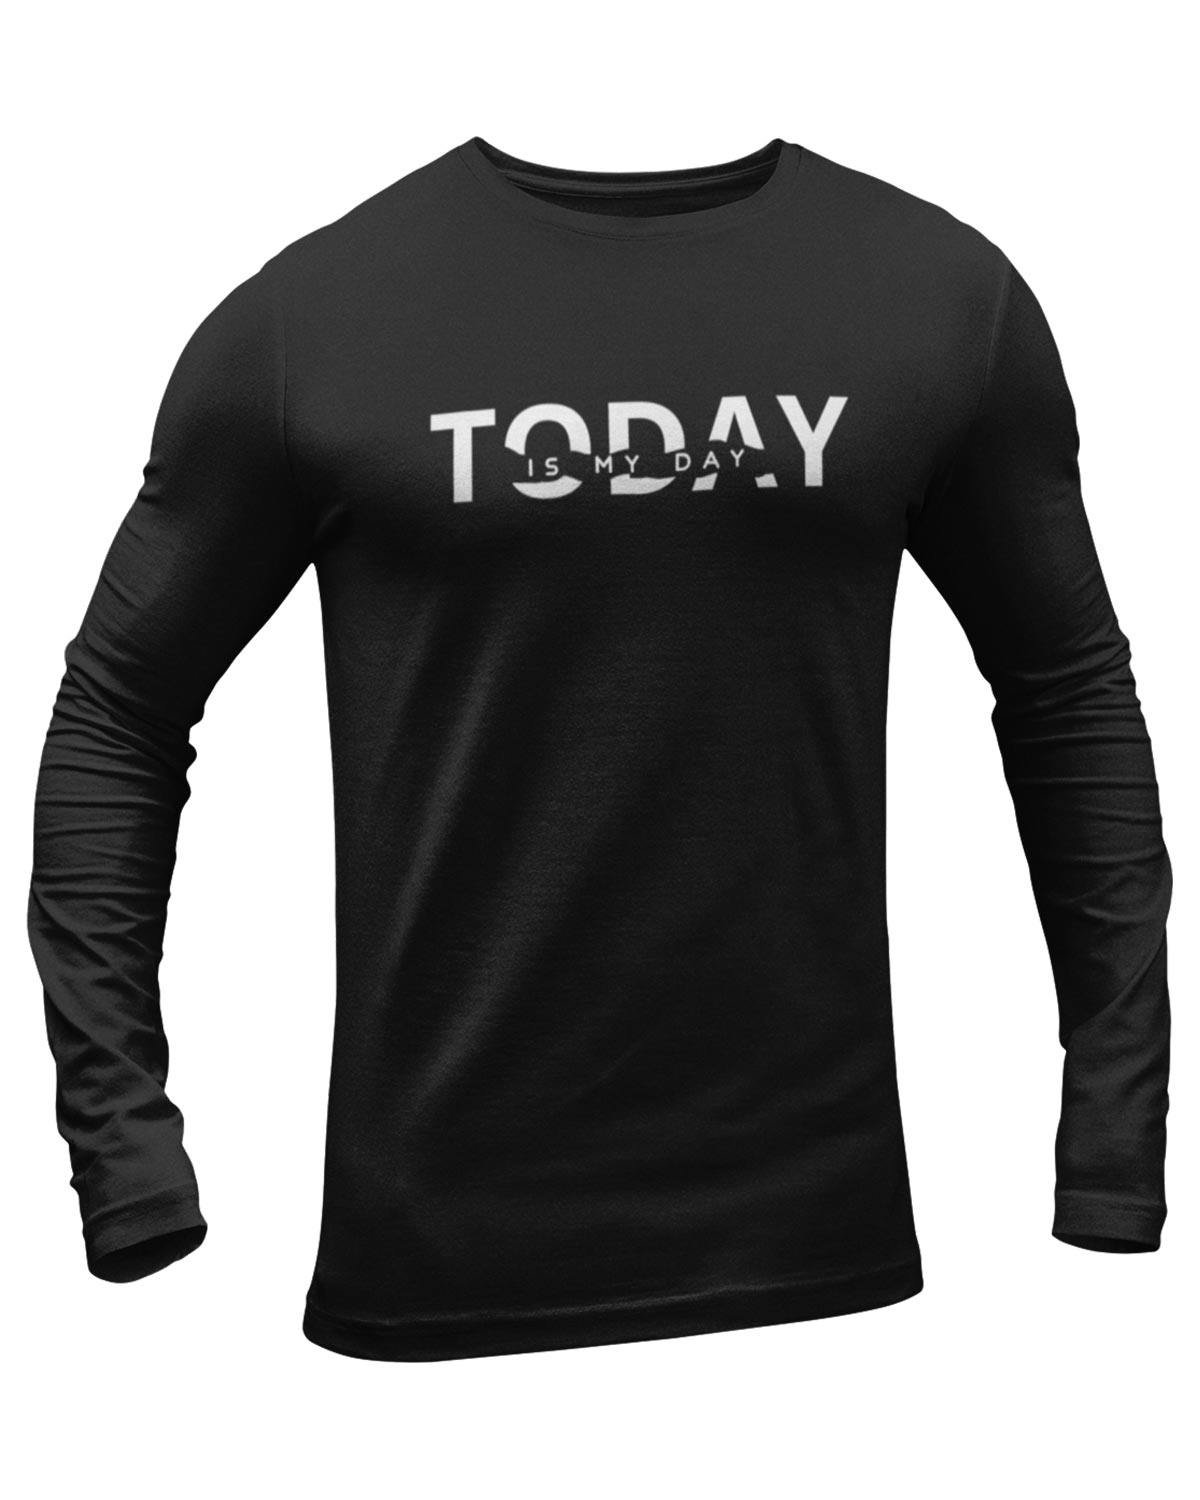 Today Is My Day Full Sleeve Geek T-Shirt